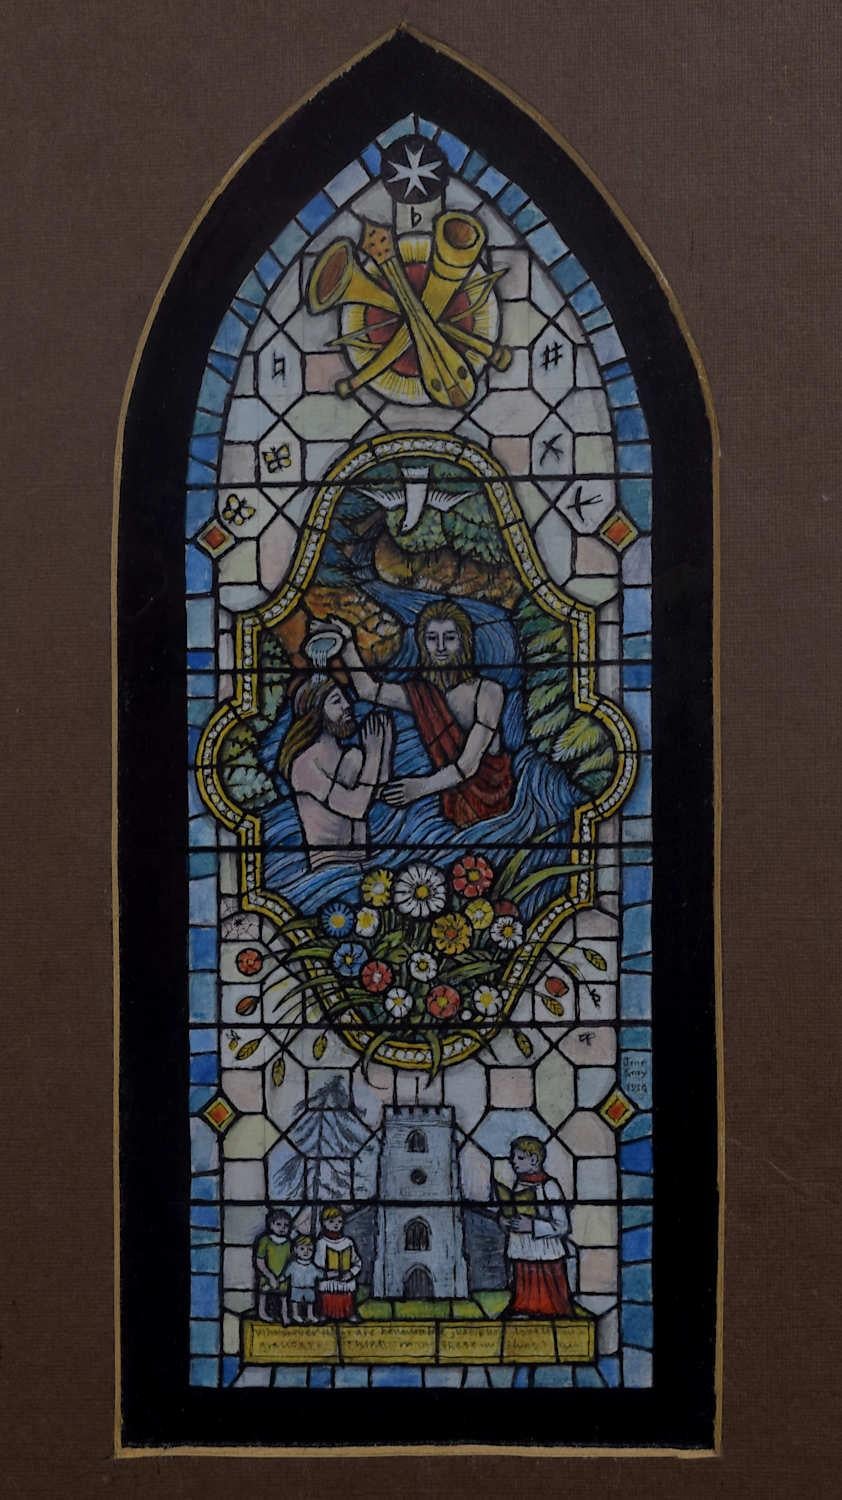 We acquired a series of watercolour stained glass designs from Jane Gray's studio. To find more scroll down to "More from this Seller" and below it click on "See all from this seller." 

Jane Gray (b.1931)
Stained Glass Design
Watercolour
20 x 9